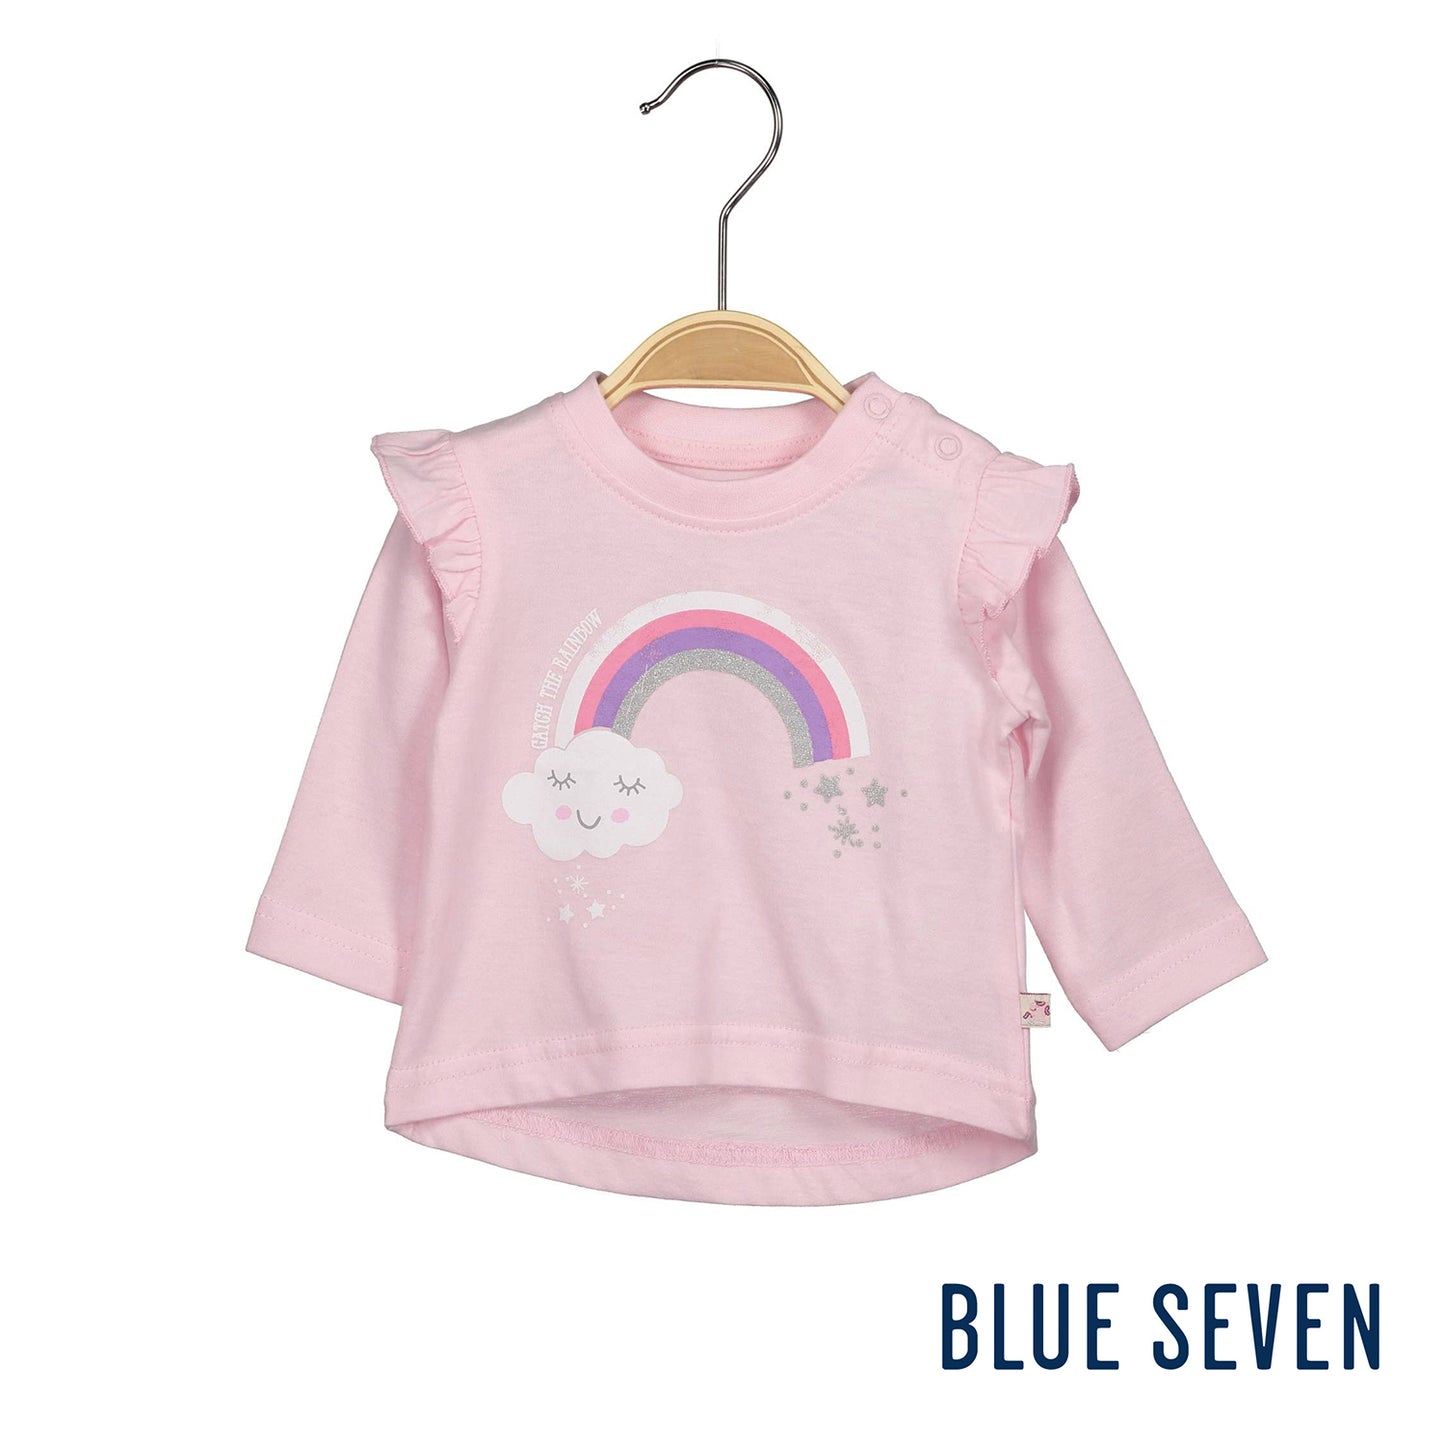 Blue Seven - Pink Long Sleeves T-Shirt For Baby Girl LAST SIZE 0-1 MONTHS